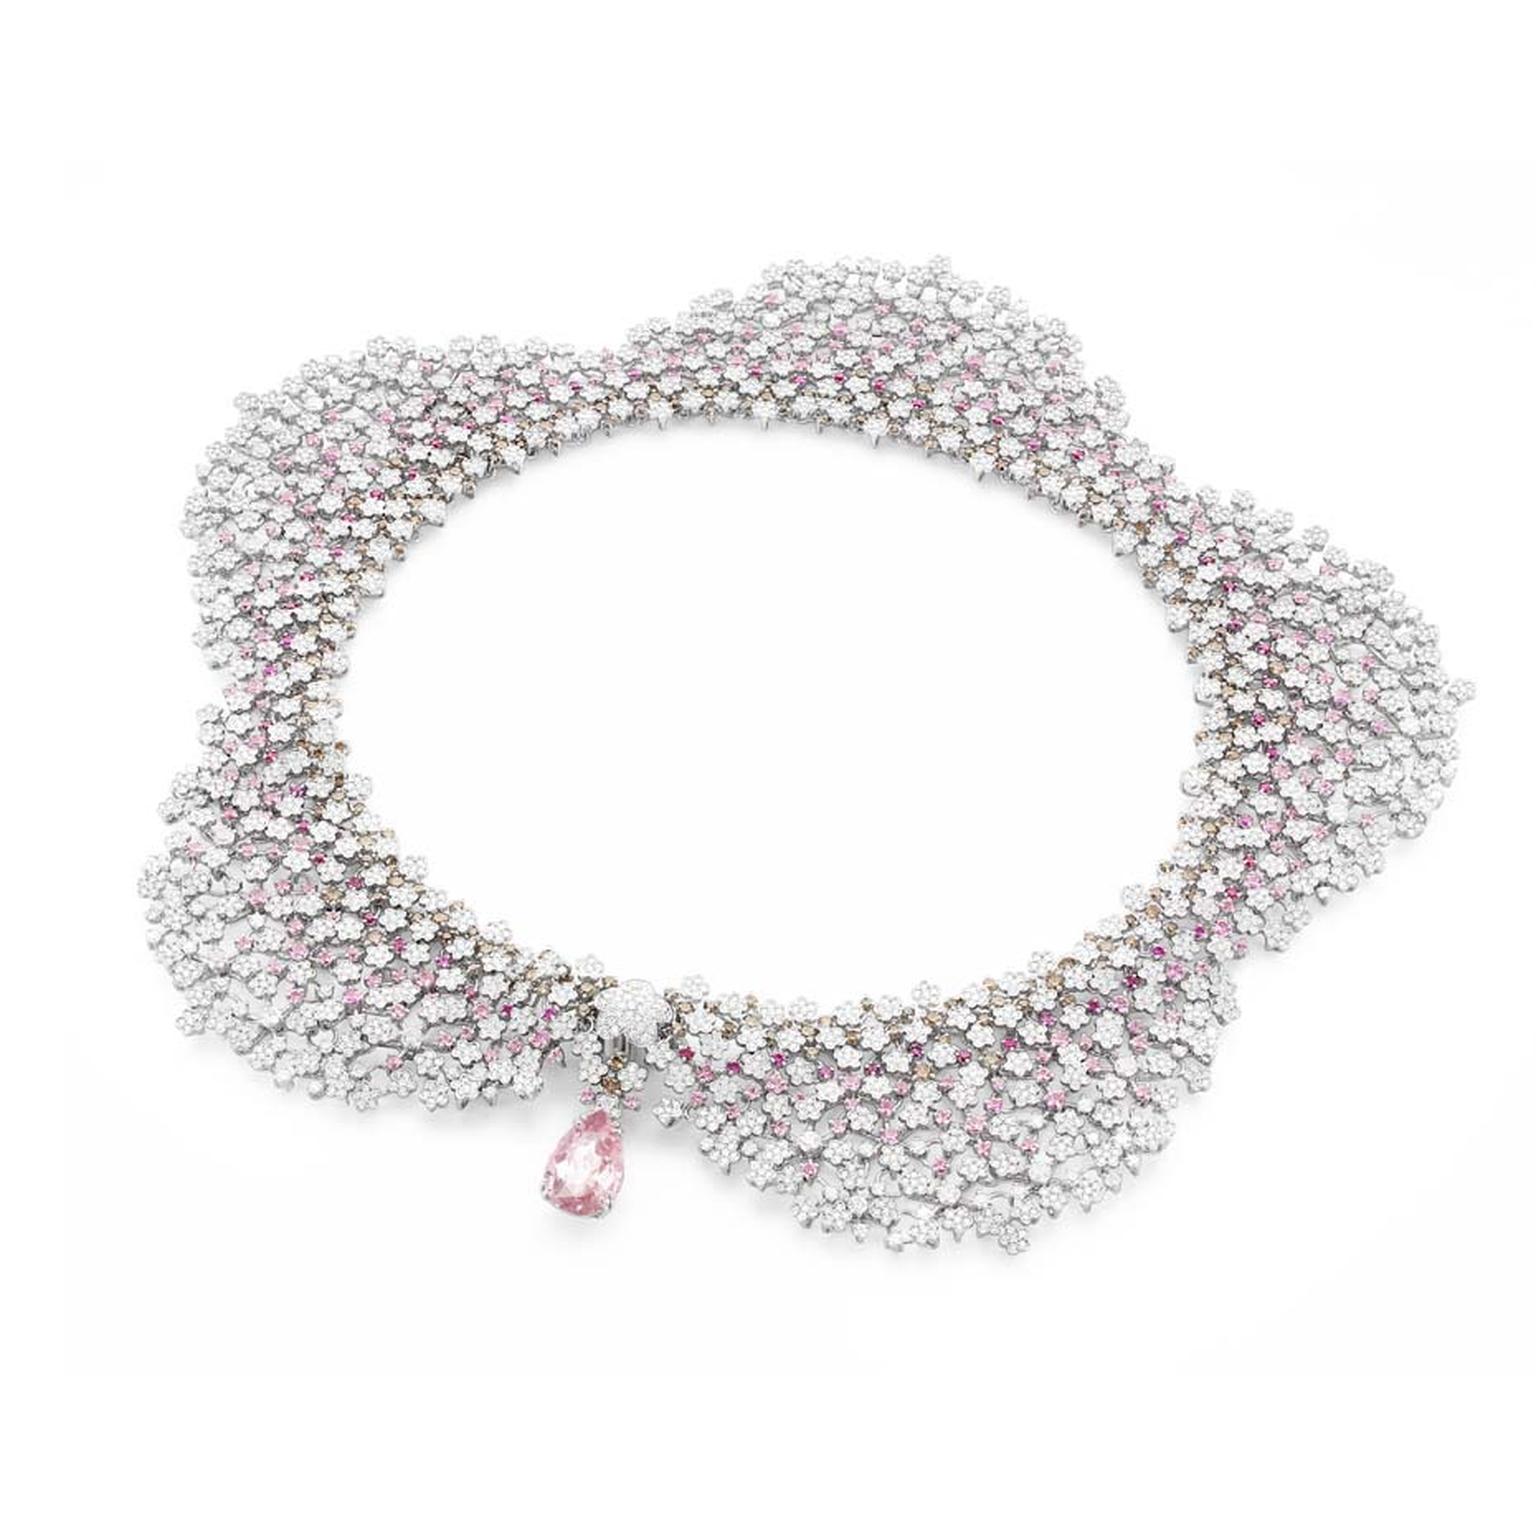 Pasquale Bruni Fiori in Fiore statement necklace, set with 258 pink sapphires that magically blend in among the 3,421 diamonds in white gold.